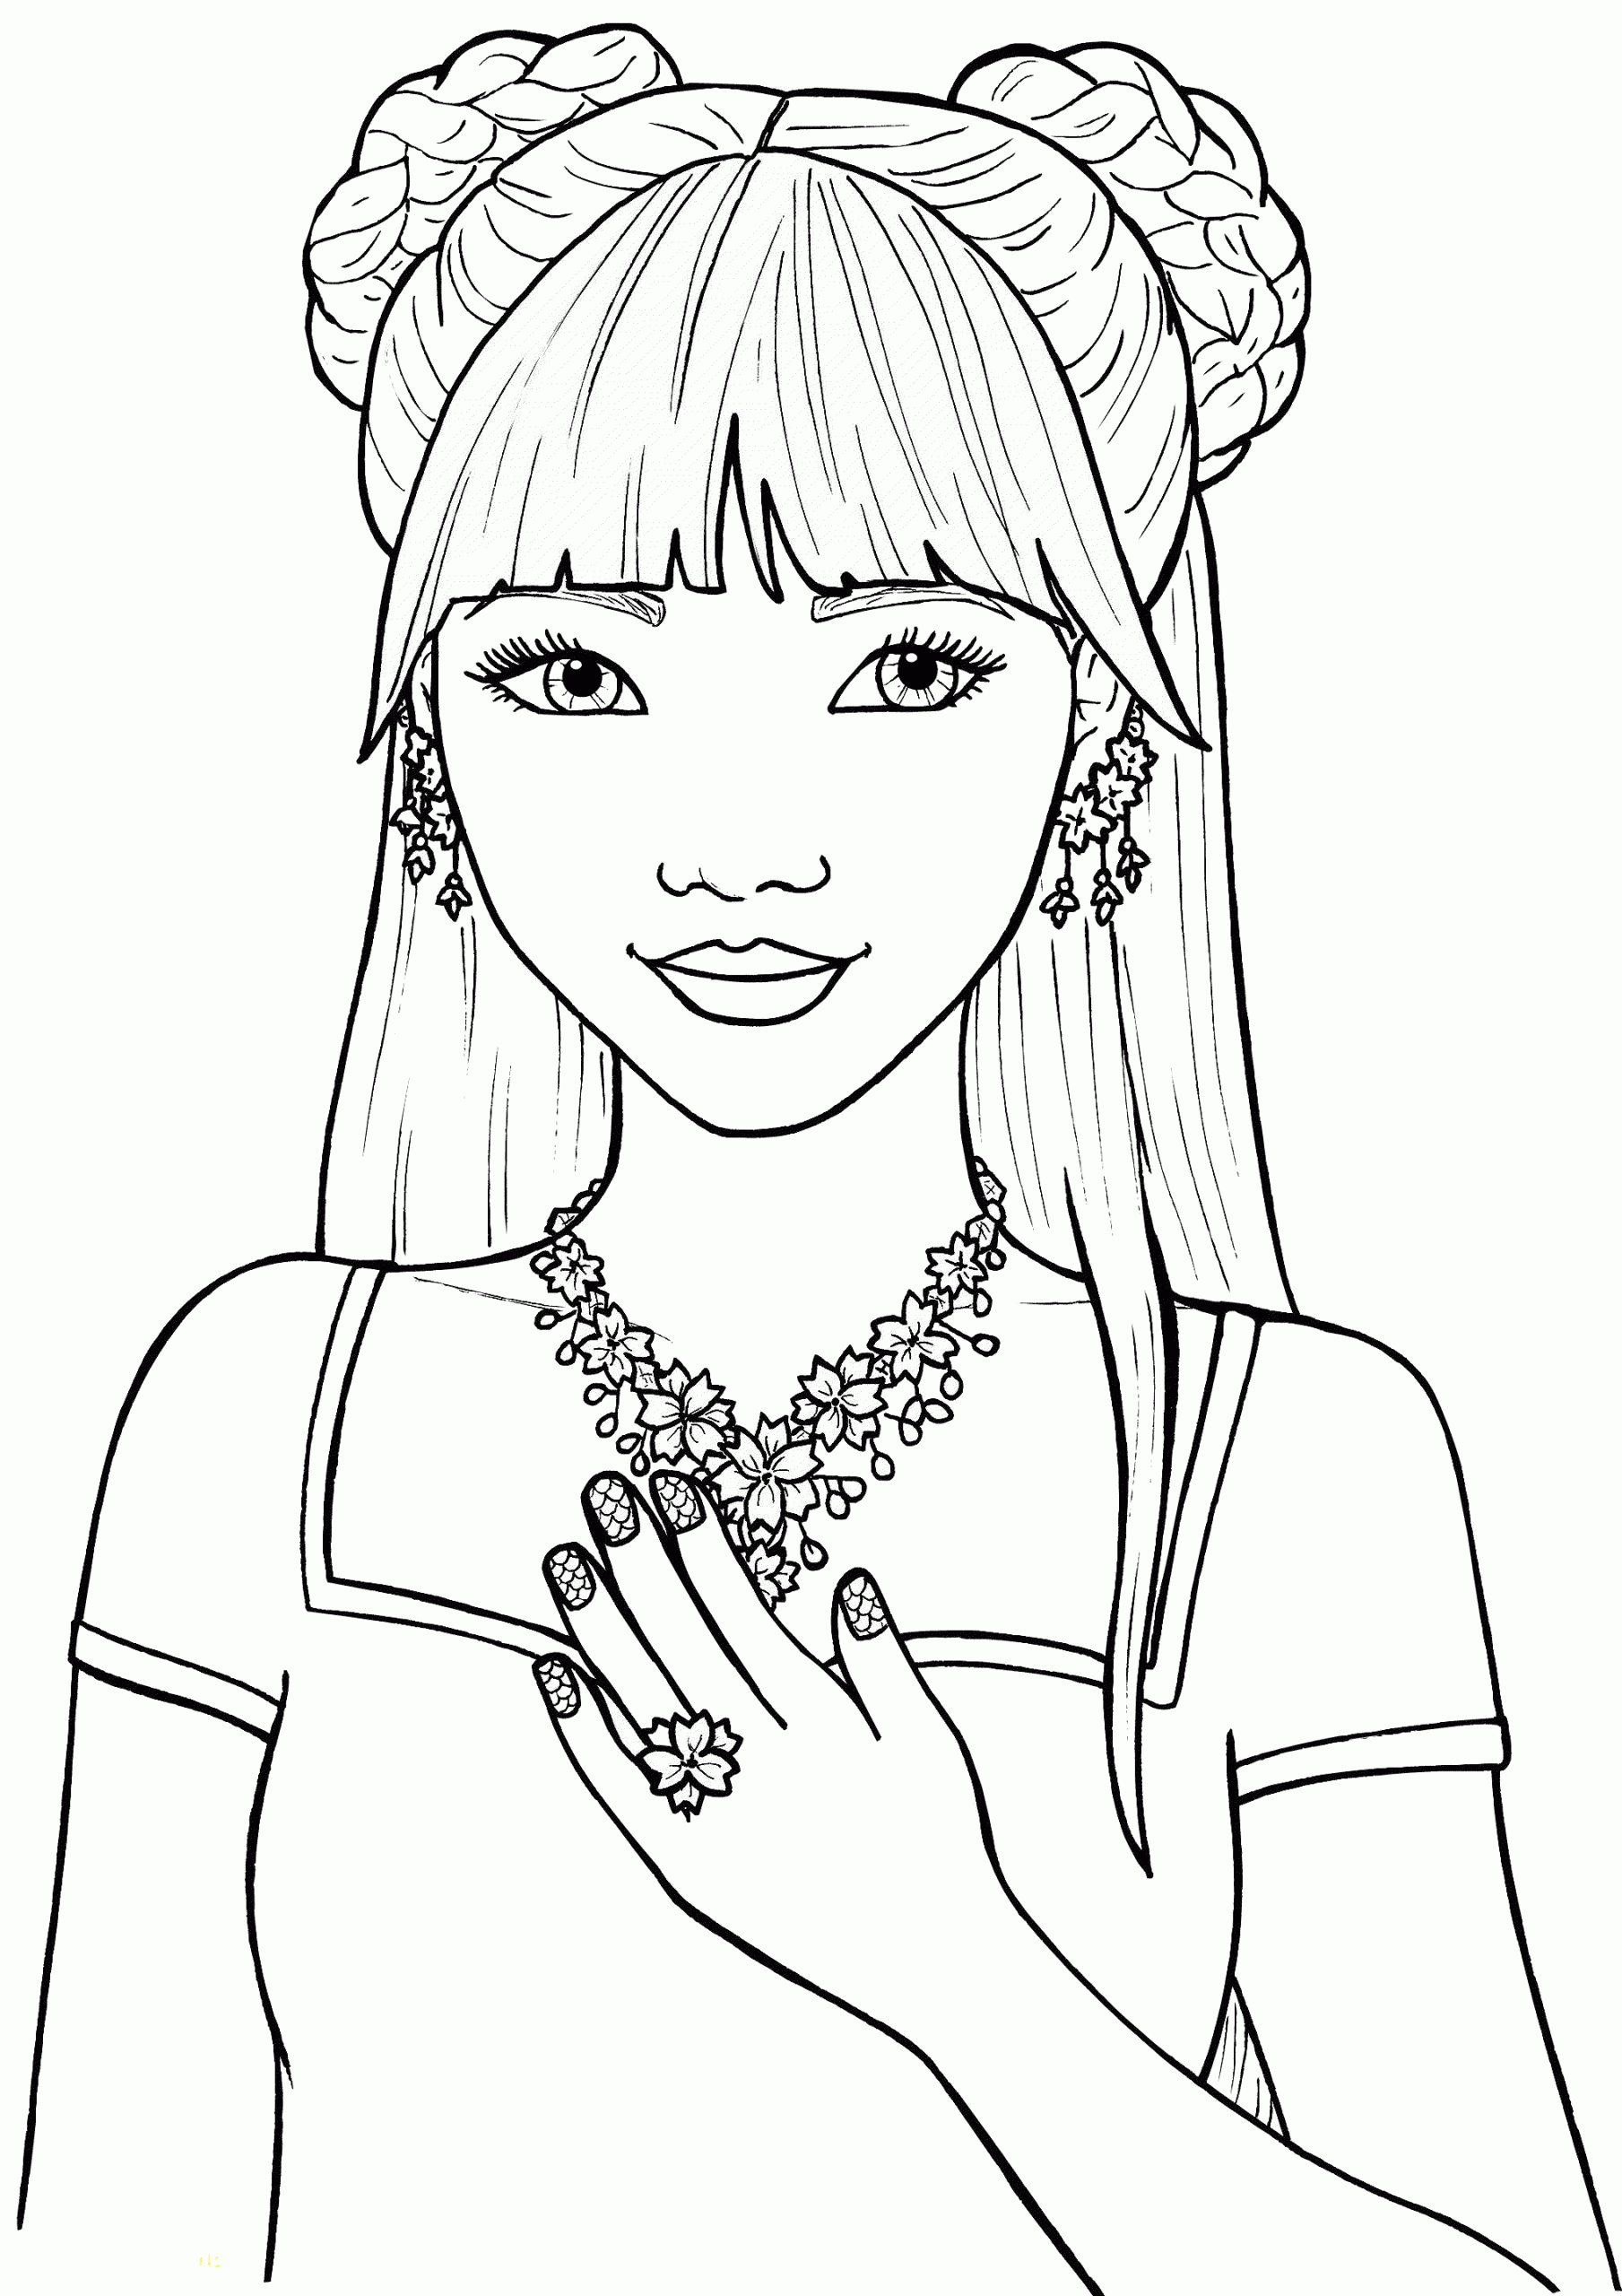 Printable Coloring Pages for Girls Cute Looking Pretty Teen Girl